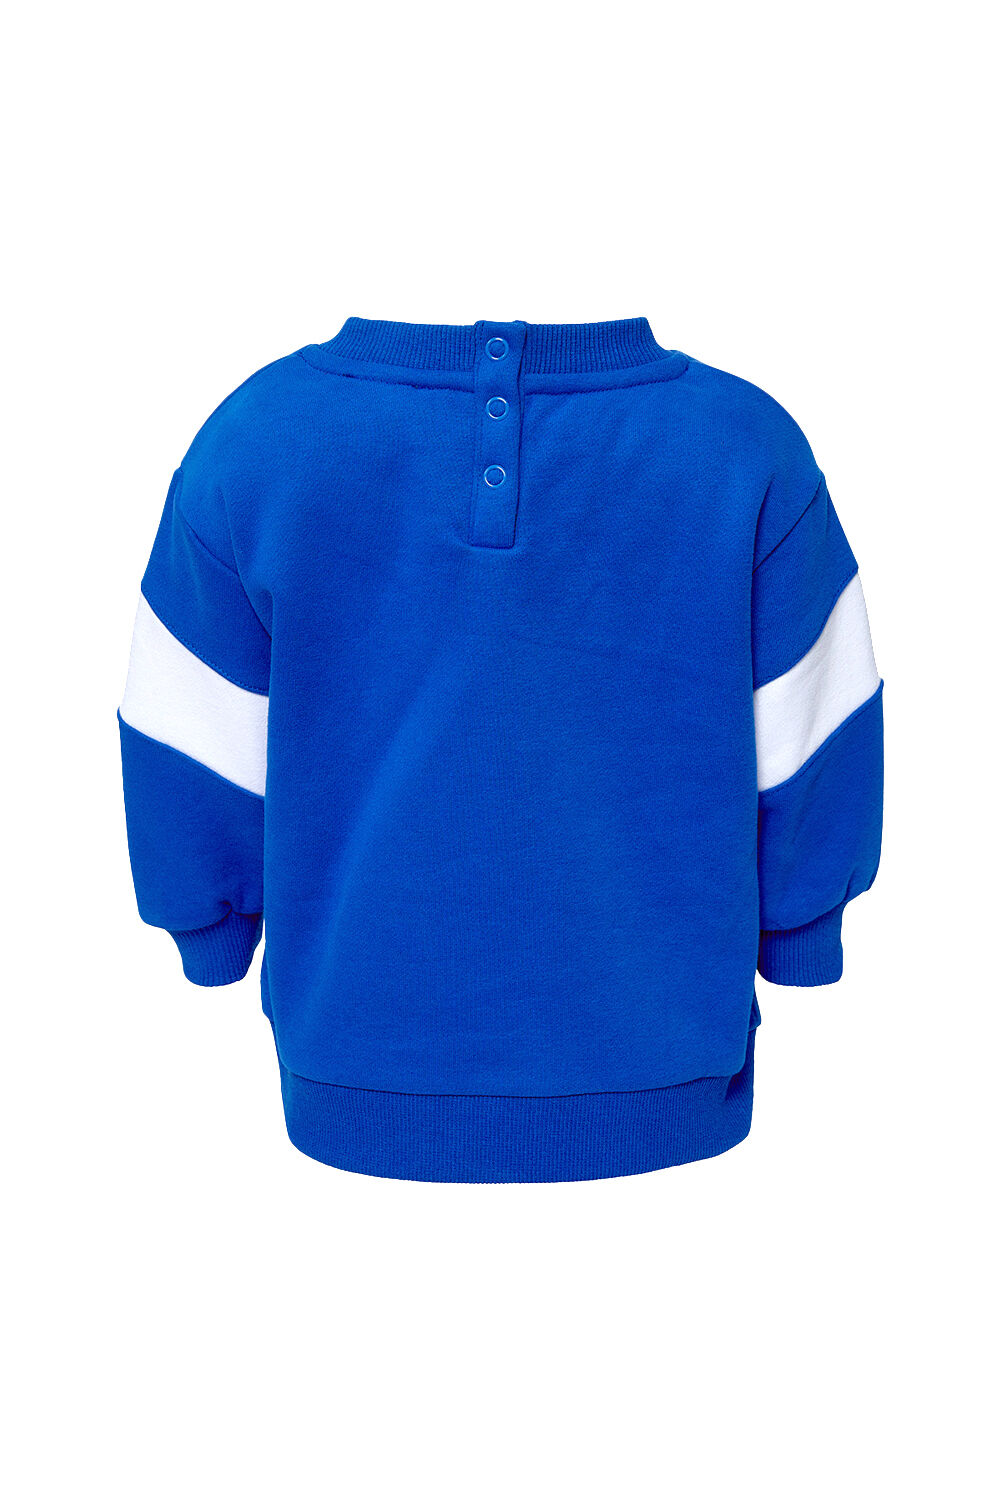 OVERSIZED TRACK SWEATER in colour DAZZLING BLUE